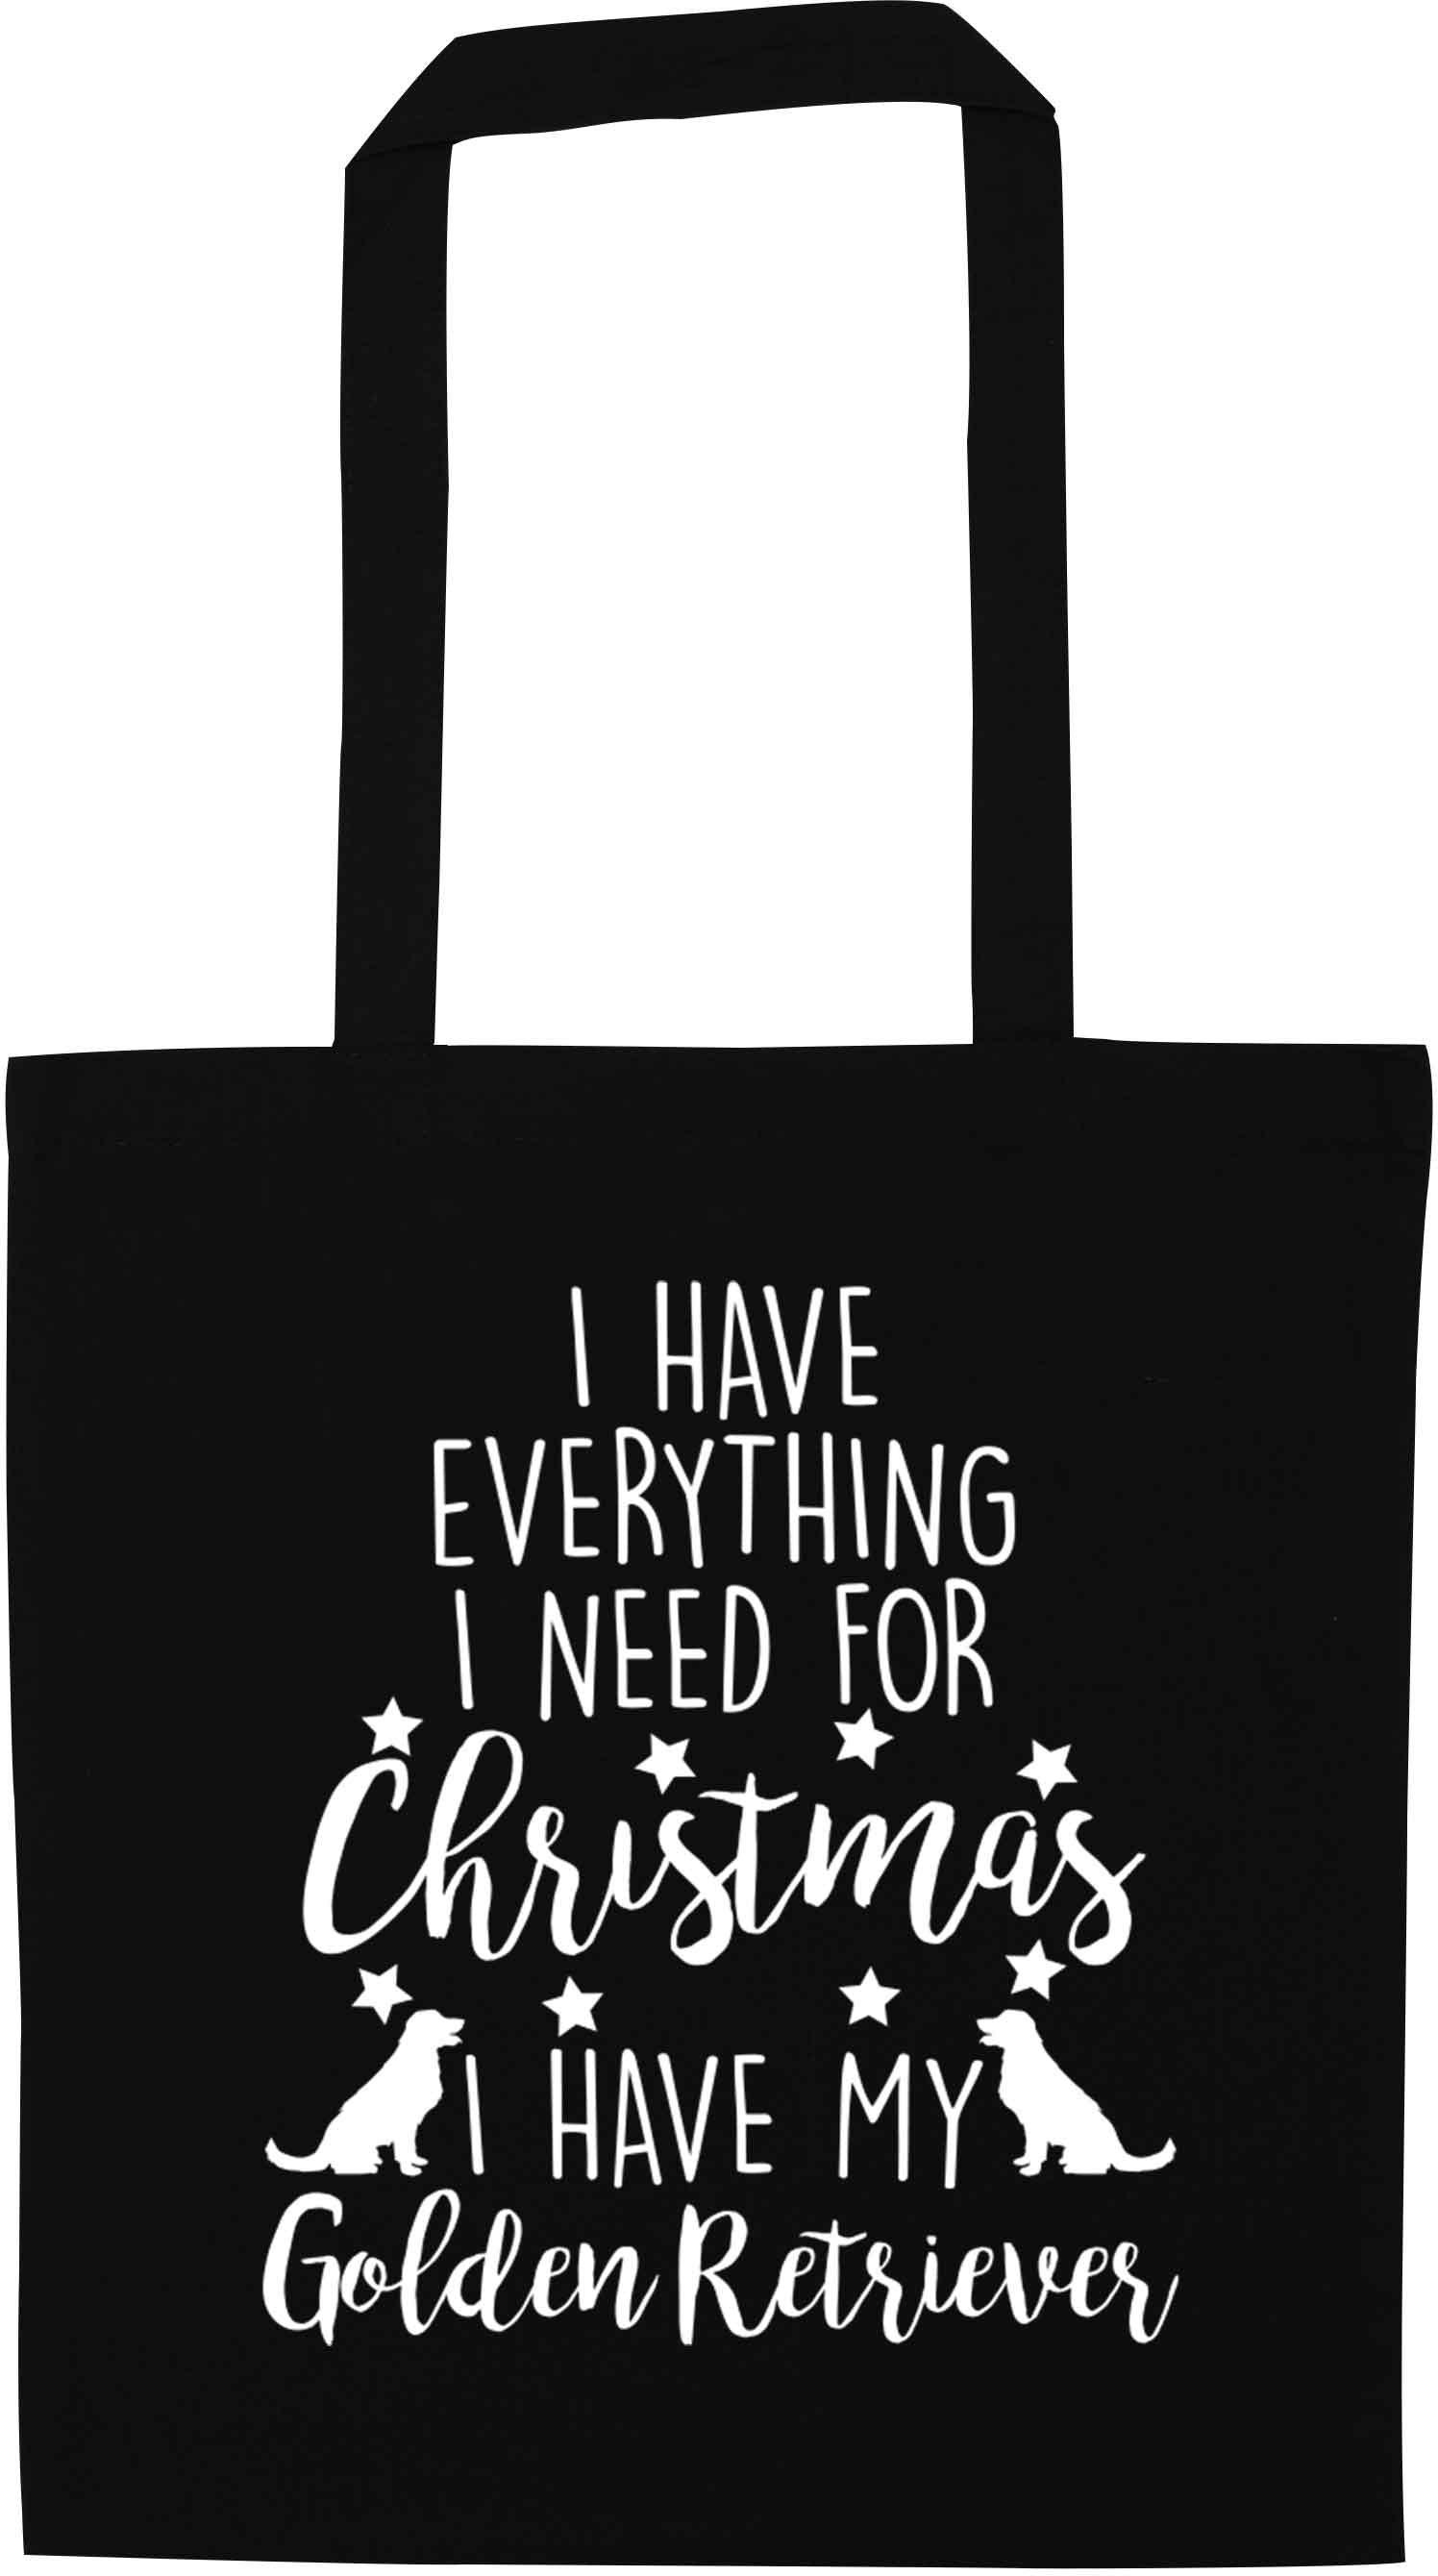 I have everything I need for Christmas I have my golden retriever black tote bag